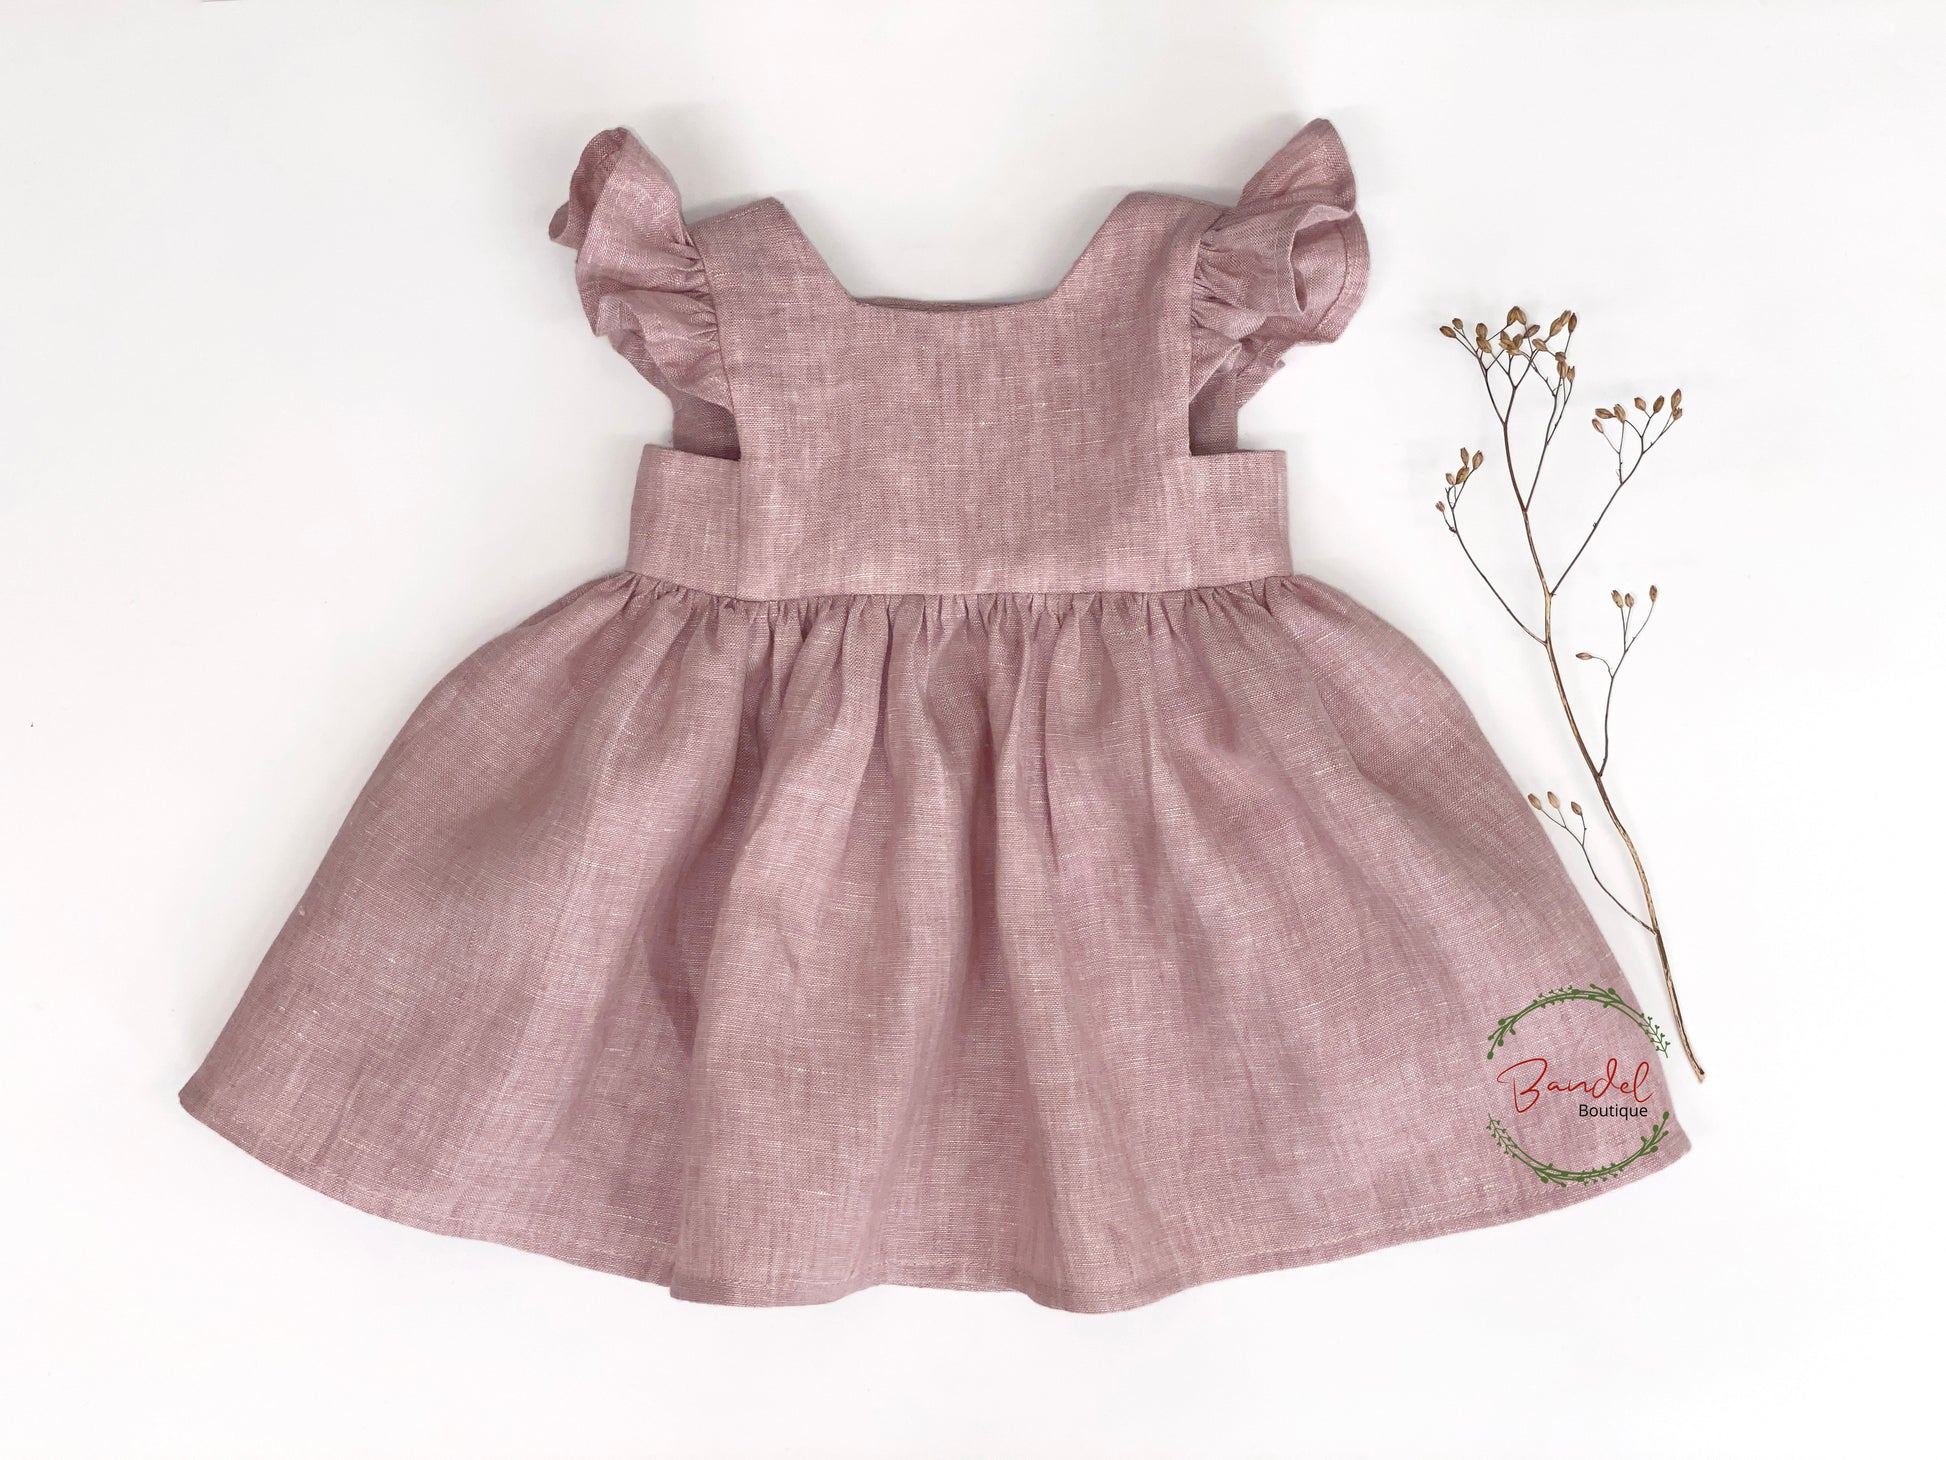 This linen girl dress is perfect for any occasion. It is crafted from high-quality, lightweight linen in an elegant old pink color. The bodice features a square neckline, flutter sleeves, and a skirt hem ruffle that is accentuated by a double row of wooden buttons in the back. This timeless piece is sure to become your child's favorite.